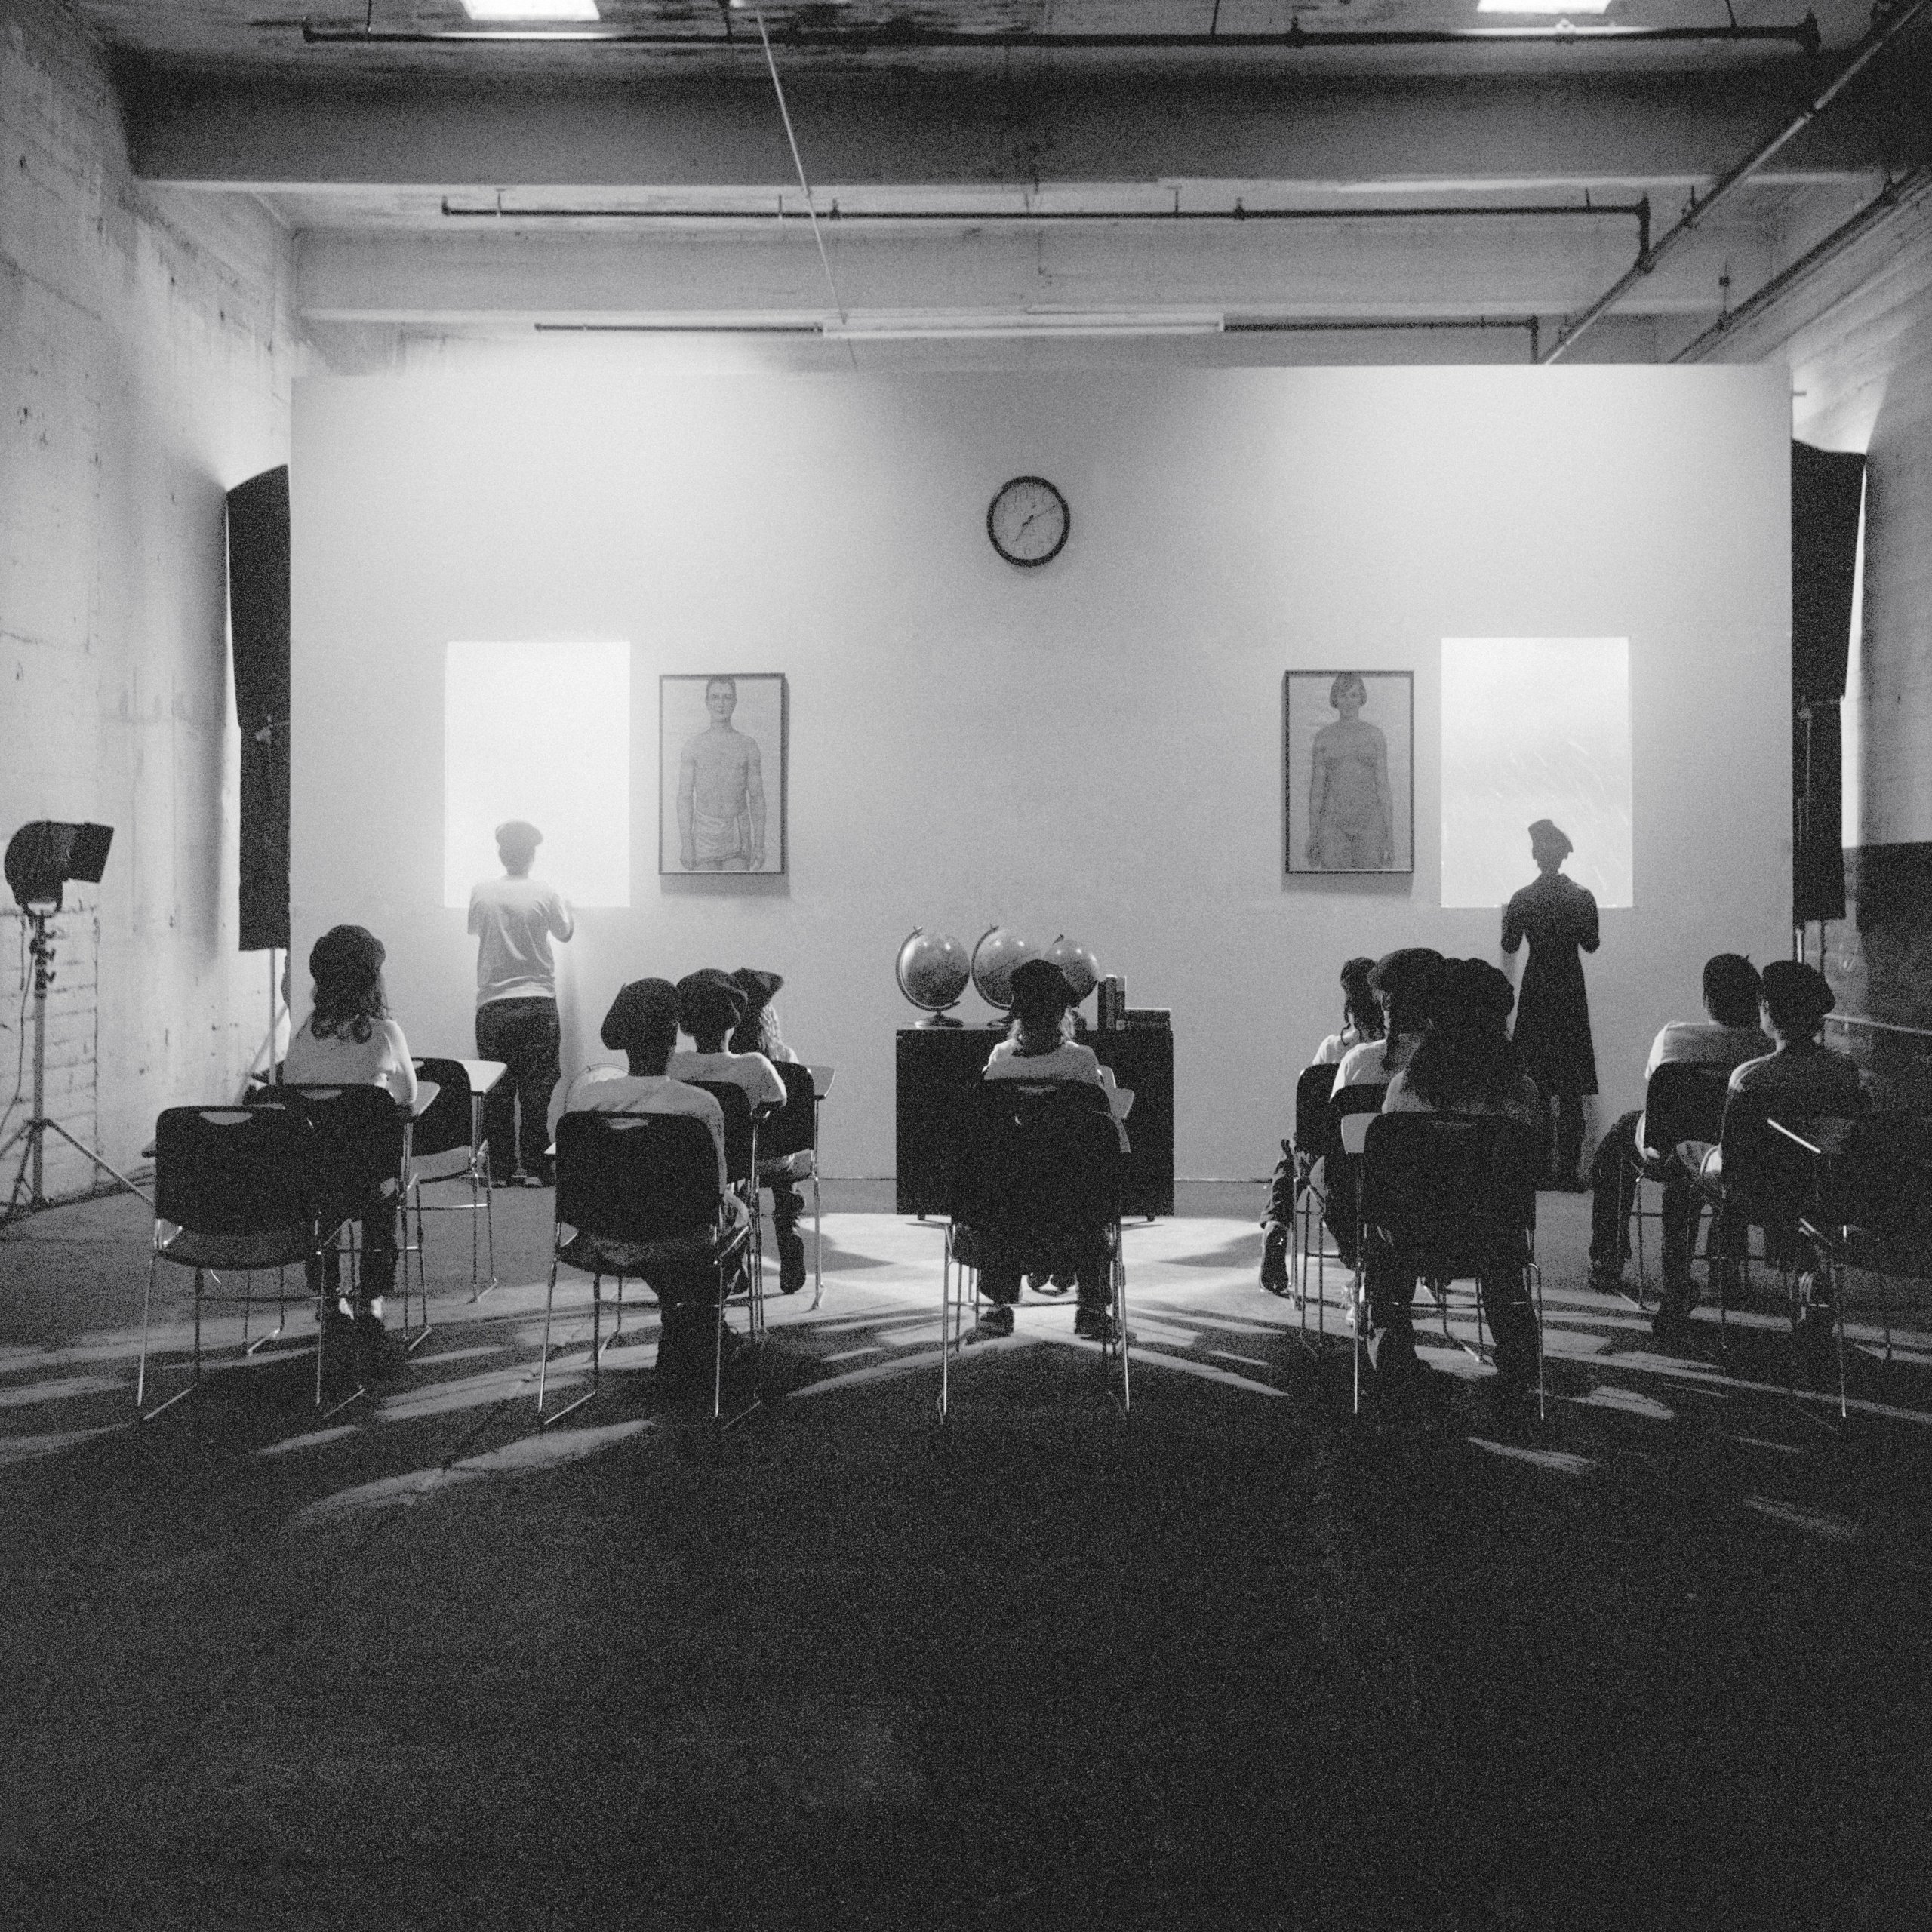     Carrie Mae Weems, A Class Ponders the Future, 2008. Photograph. Courtesy the artist and Jack Shainman Gallery, New York, NY.

